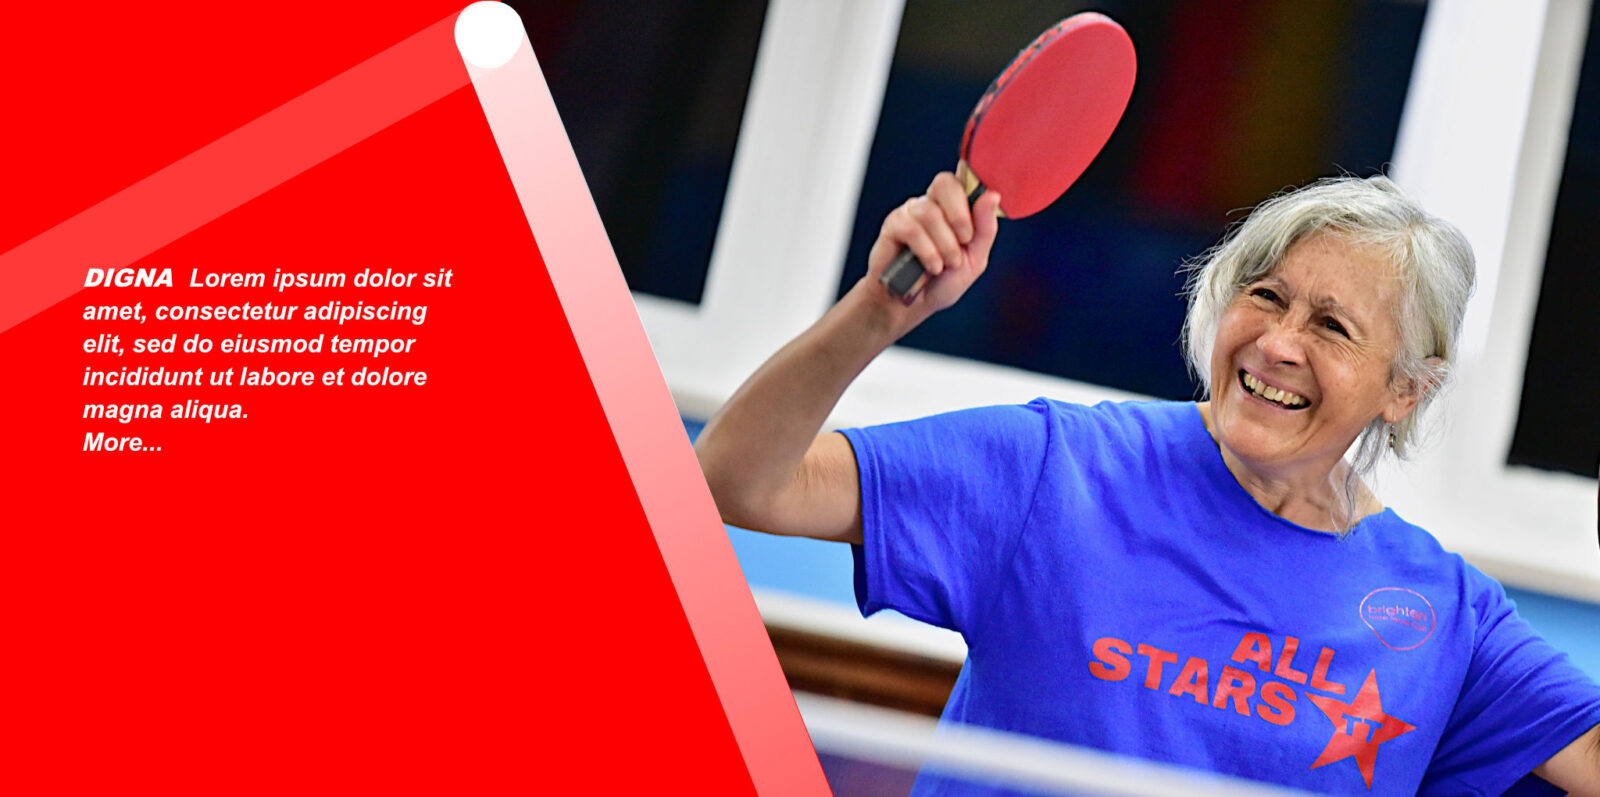 Brighton Table Tennis Club -building a grass roots community